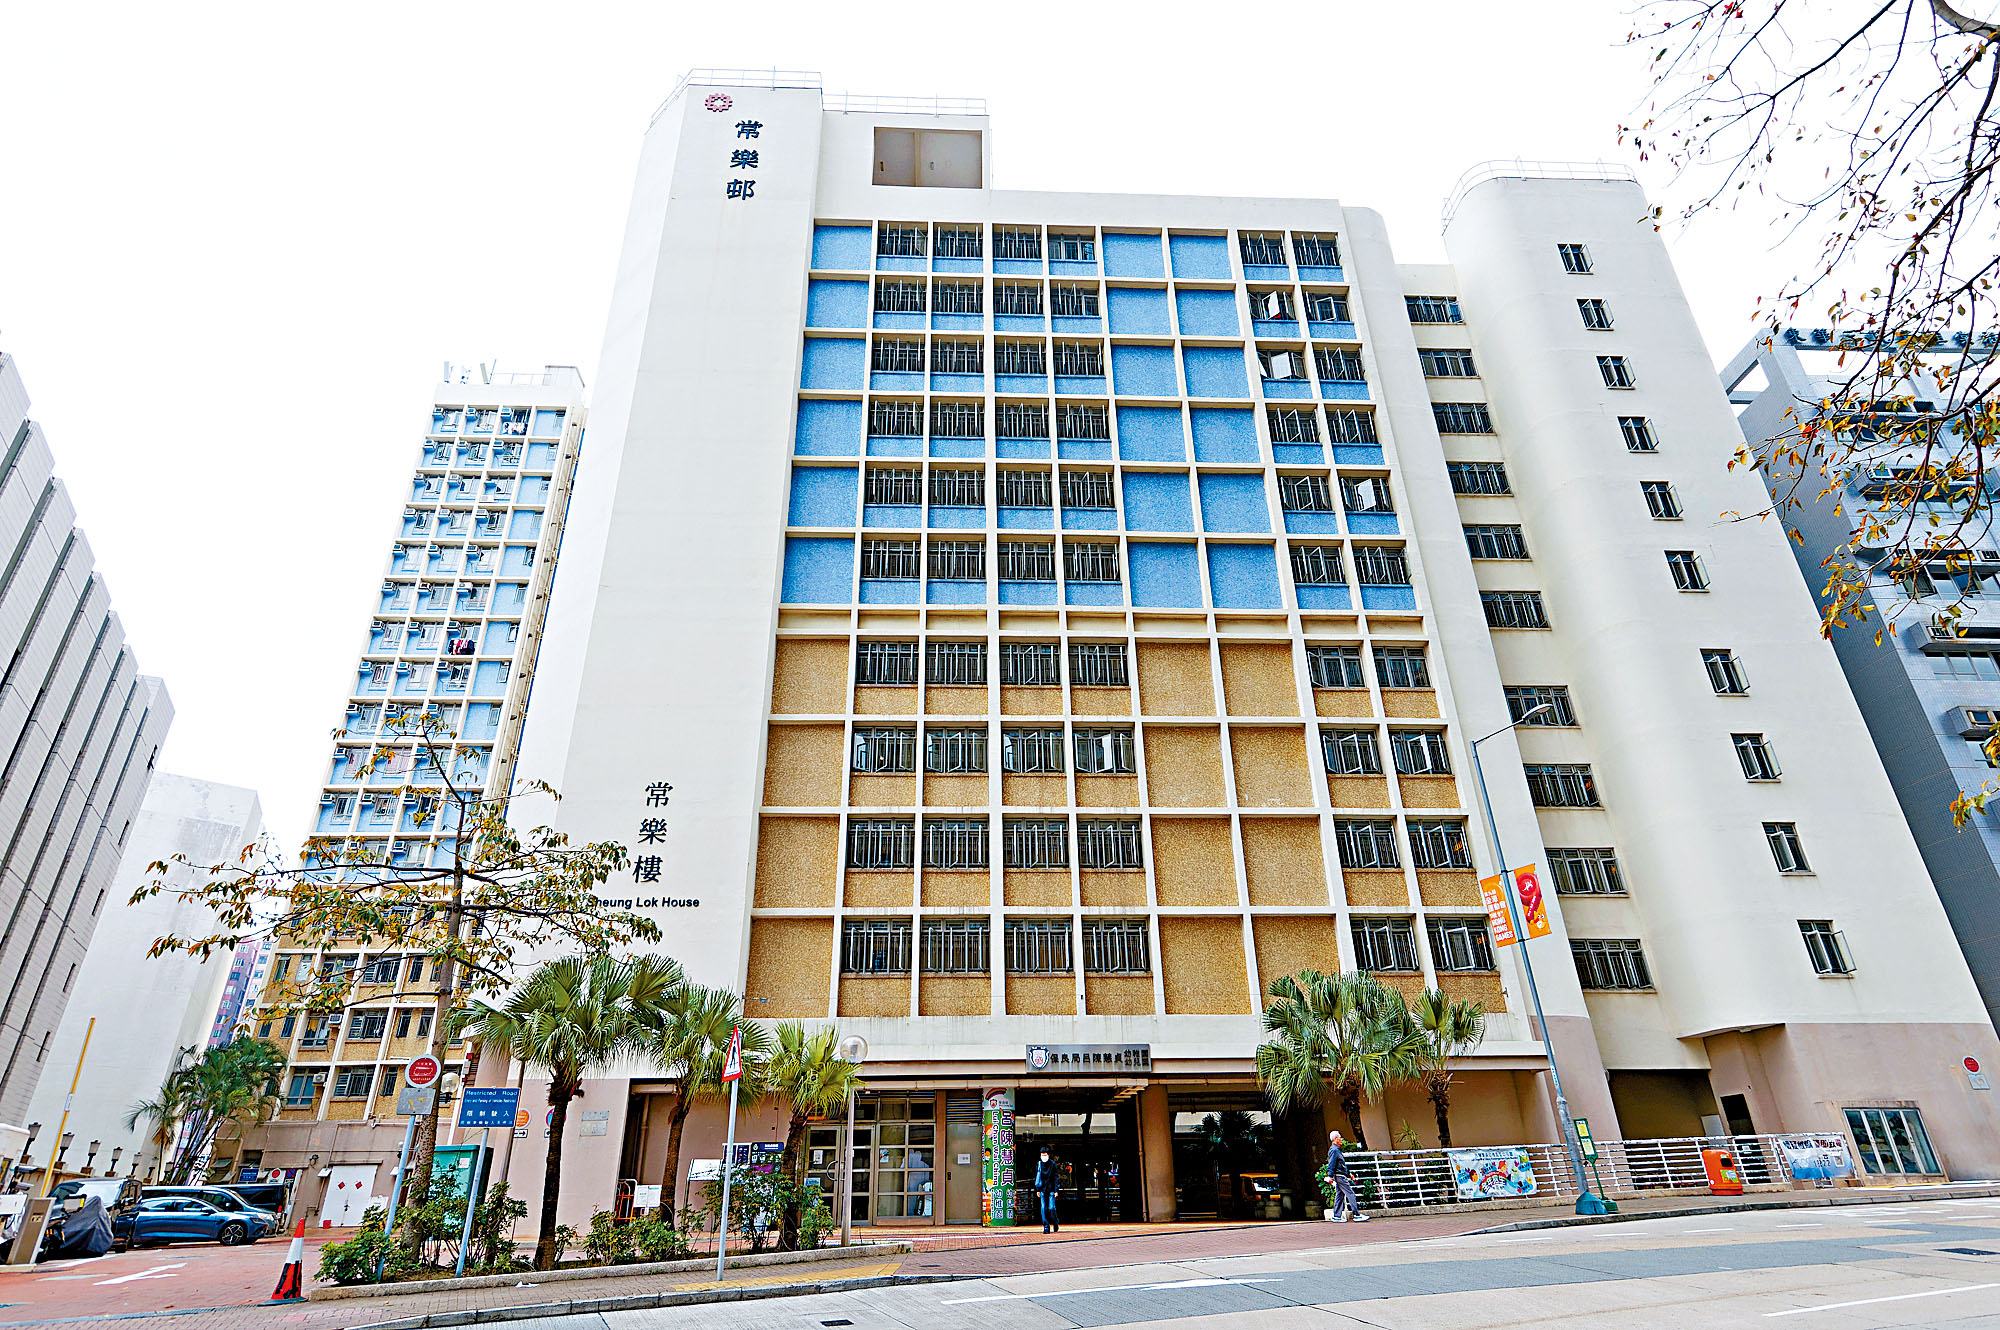 Gold Award for the Best PRH Estate (Property Services) Small Estate -- Cheung Sha Wan Estate